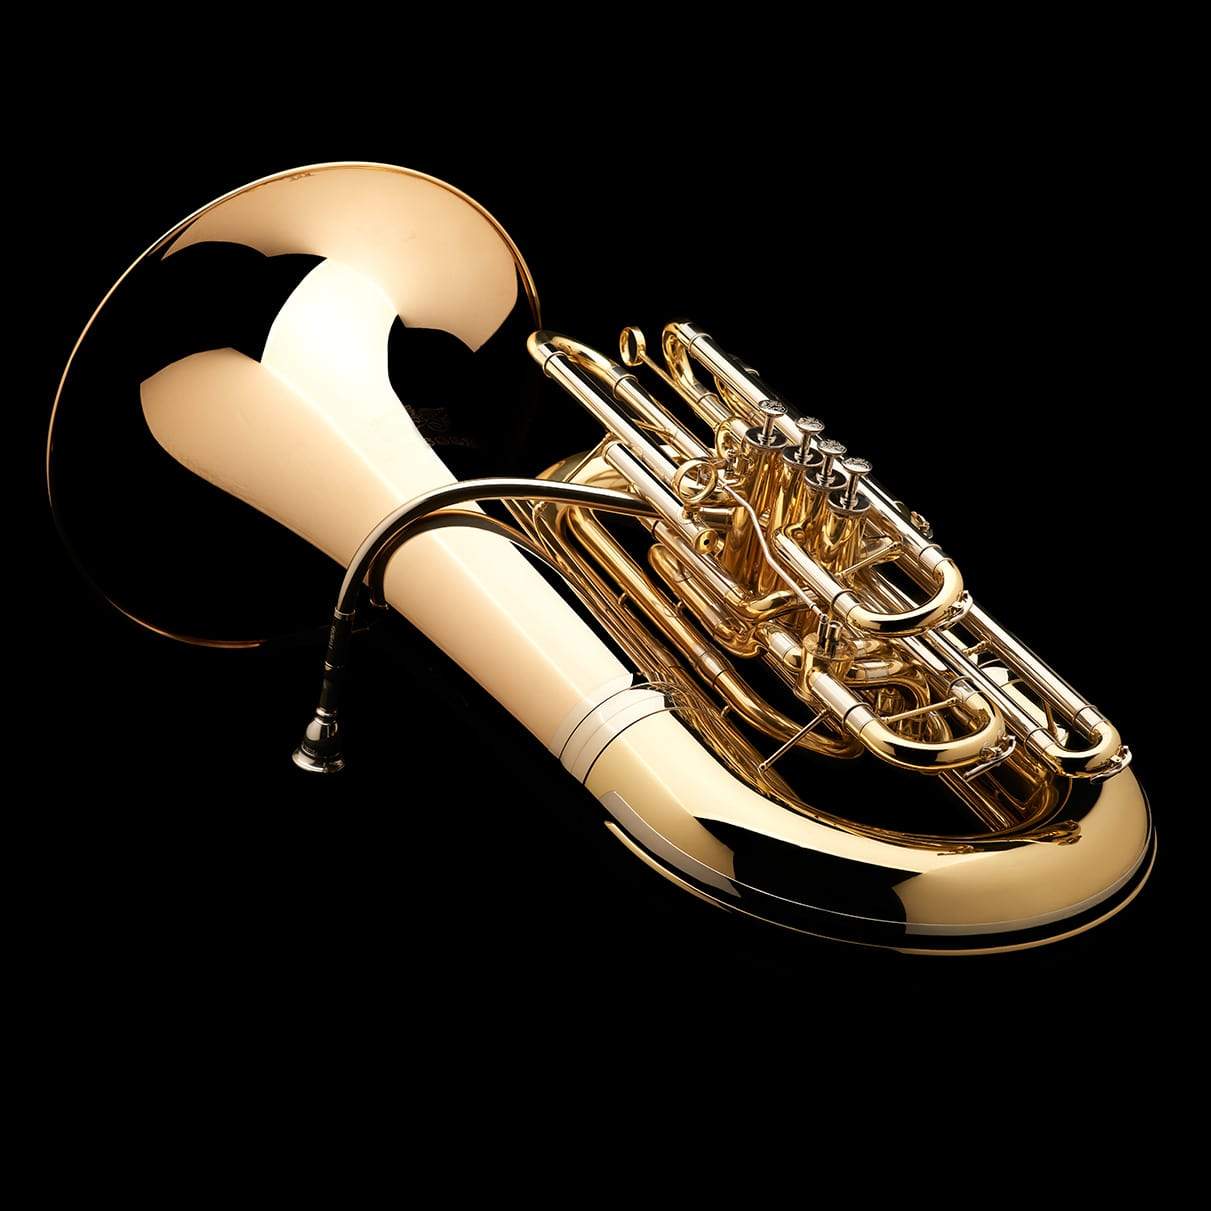 An image of the back of a BBb 4/4 Tuba with 5-valves 'Viverna' from Wessex Tubas, laying on its side